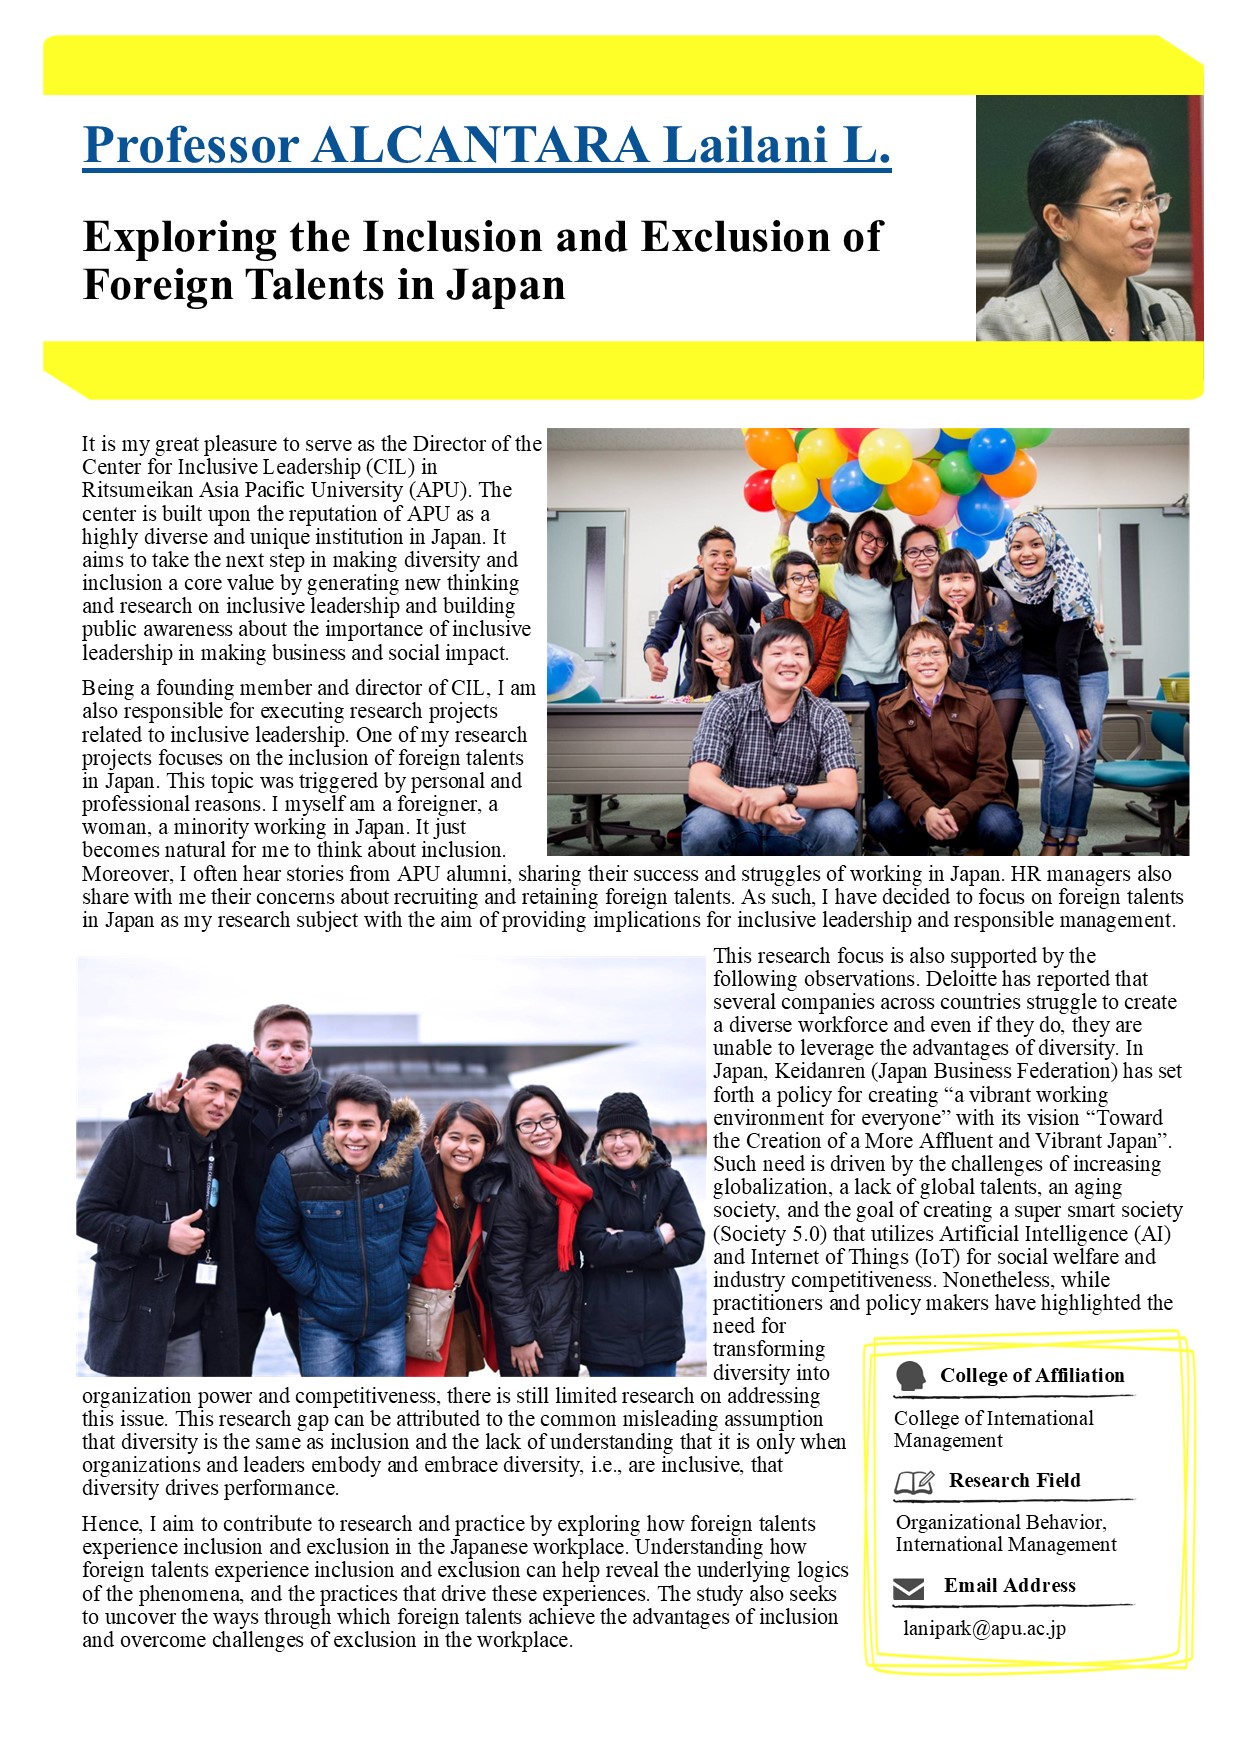 Exploring the Inclusion and Exclusion of Foreign Talents in Japan